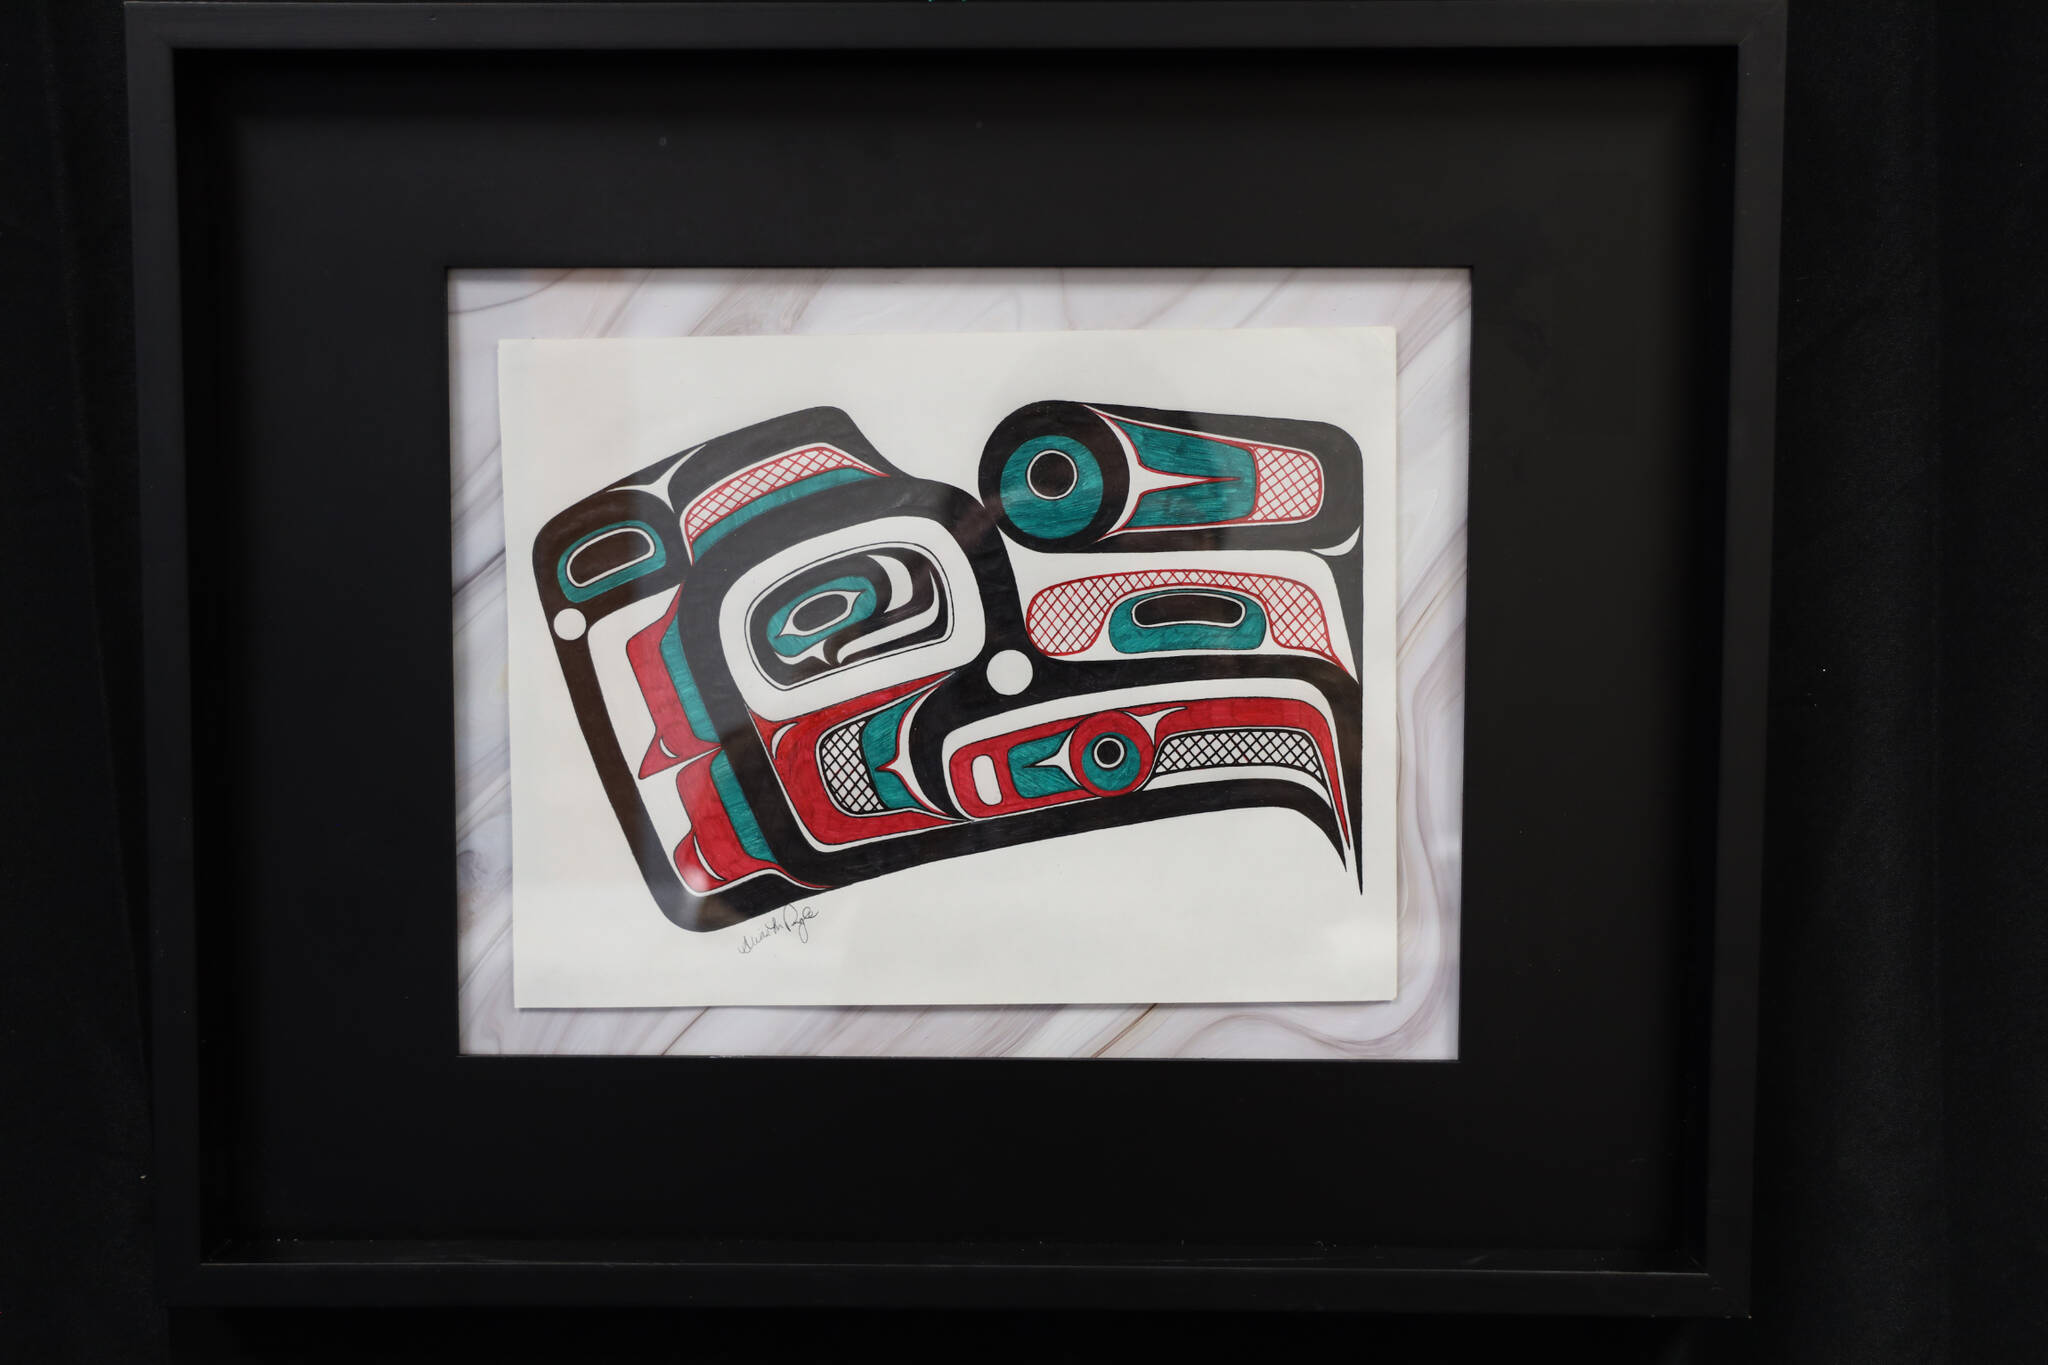 A Northwest Coast formline design by Juneau artist Alexis Pringle was one of the many featured in a recent art gallery hosted Friday evening at the University of Alaska Southeast that showcased students’ work from the UAS Northwest Coast Art program. (Clarise Larson / Juneau Empire)